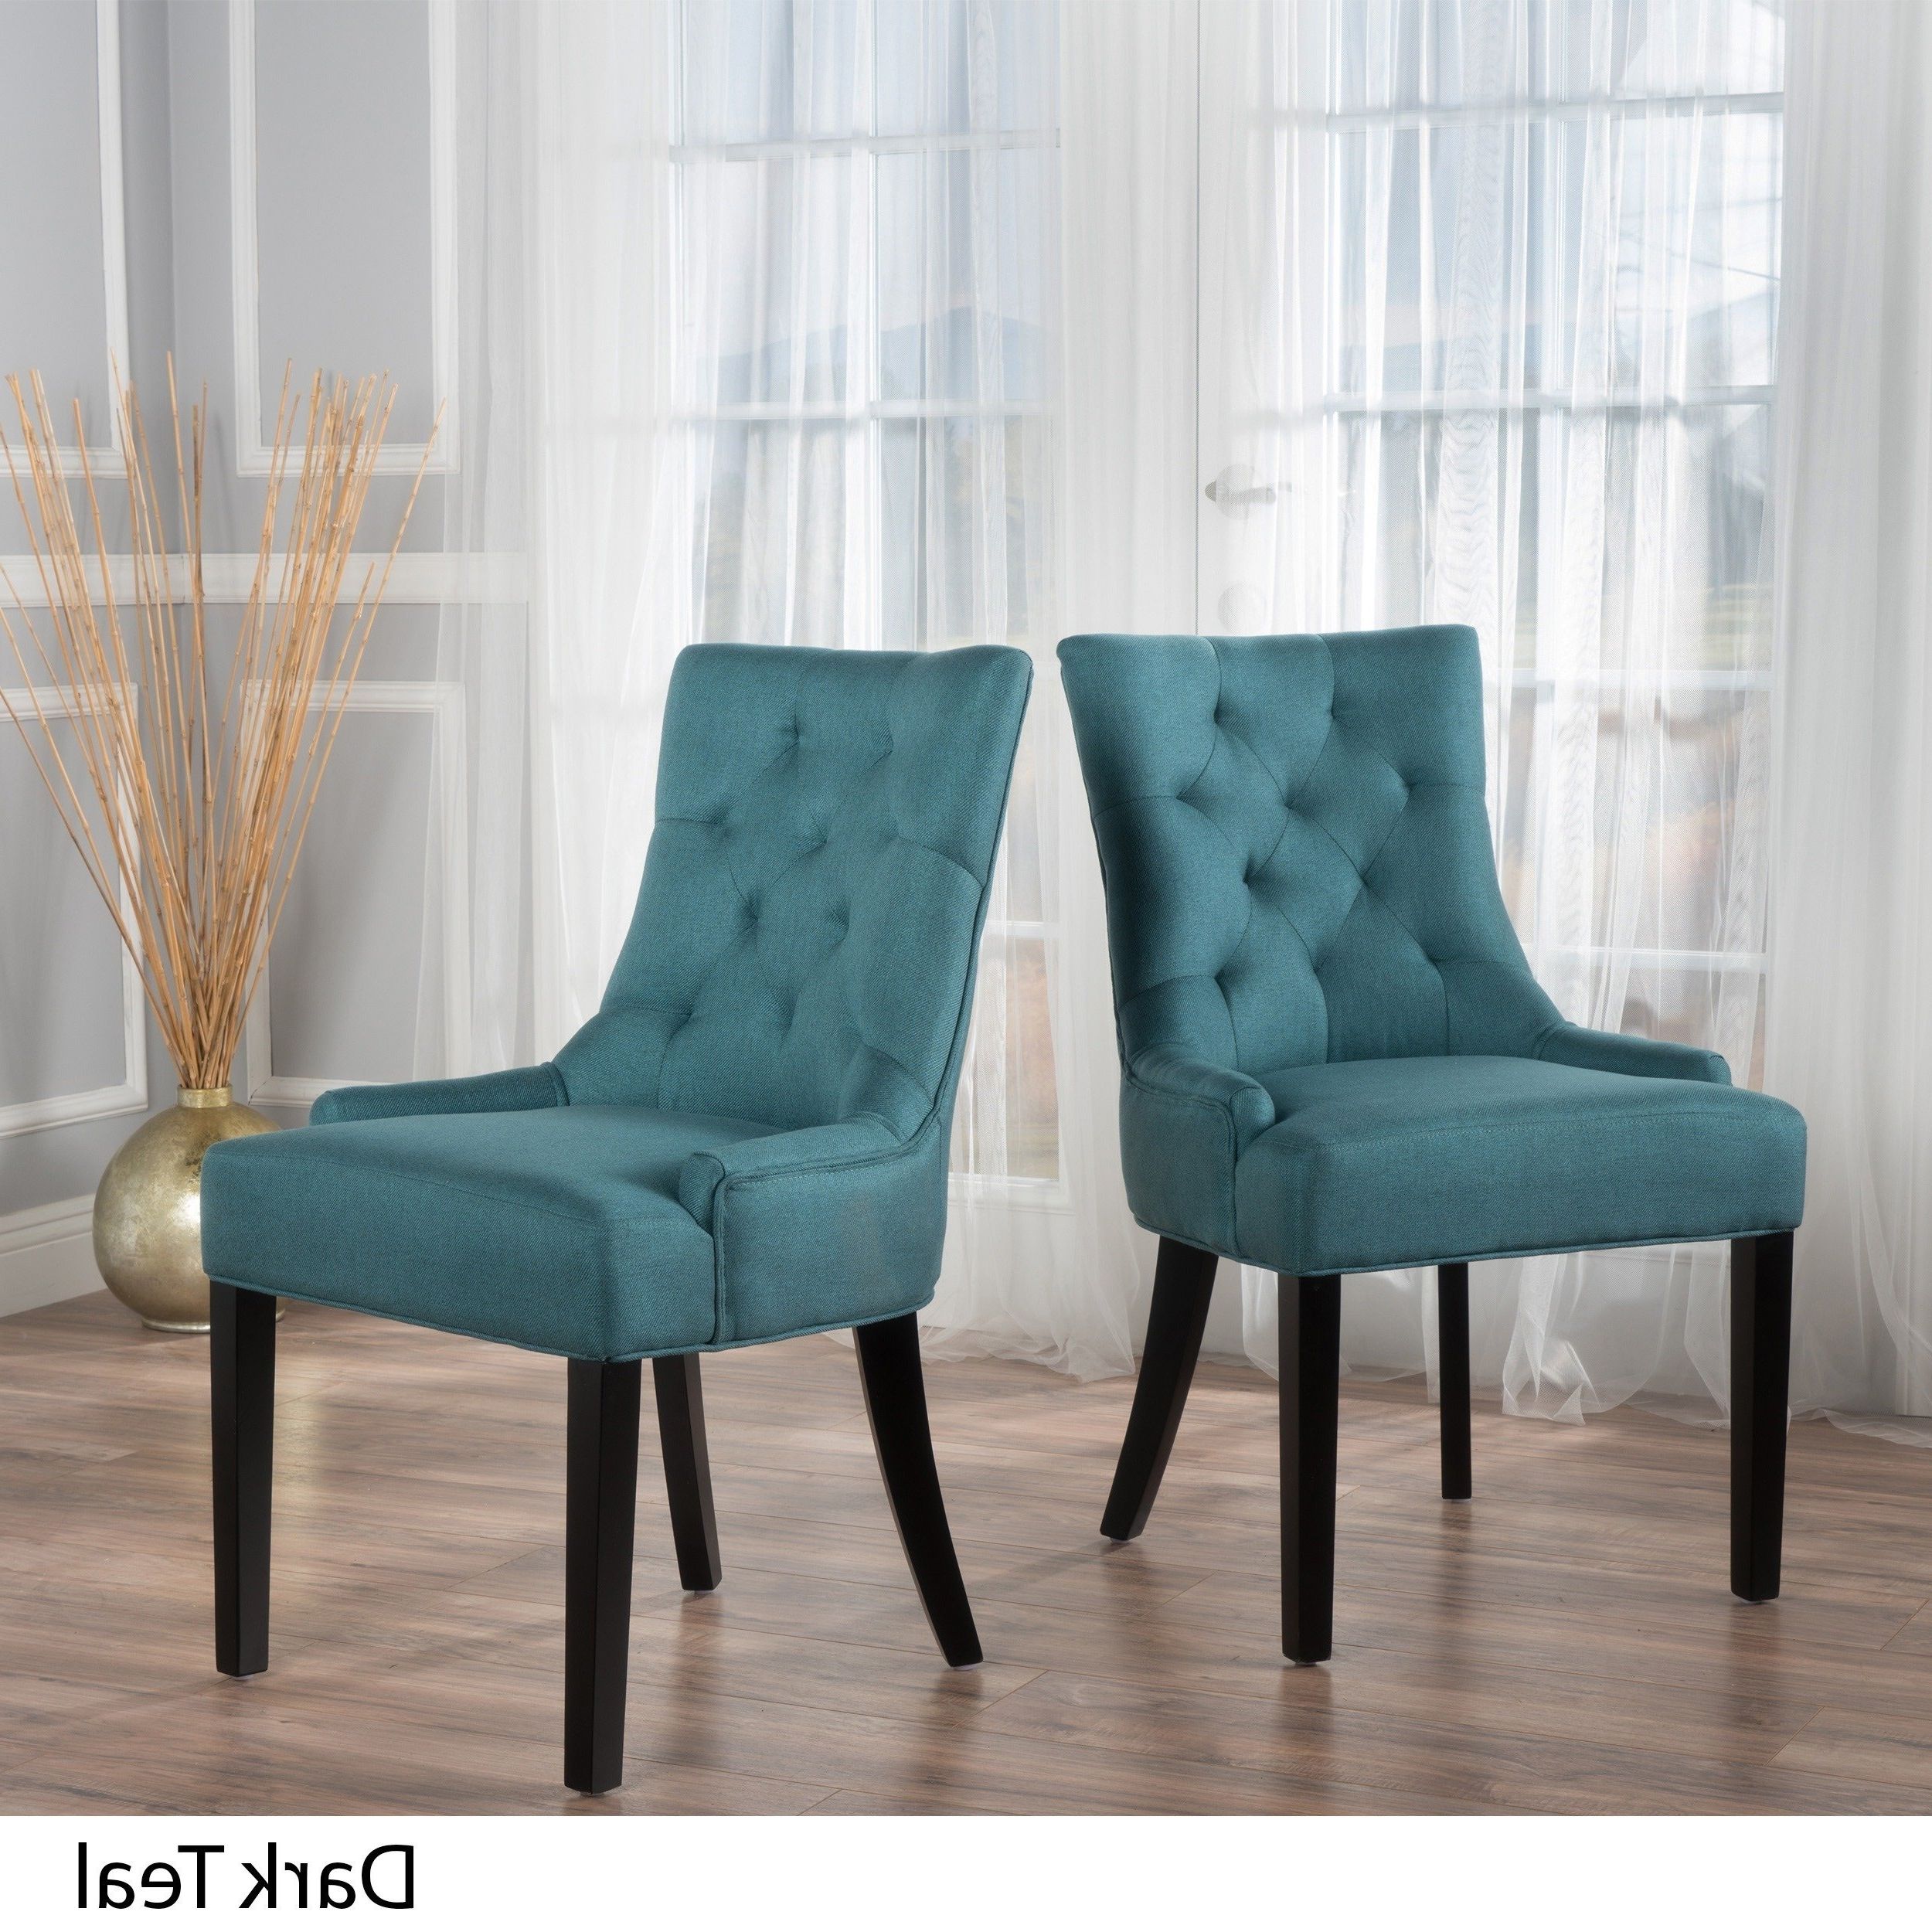 Hayden Ii Black Side Chairs Pertaining To Widely Used Shop Hayden Tufted Fabric Dining/ Accent Chair (set Of 2) (View 11 of 20)